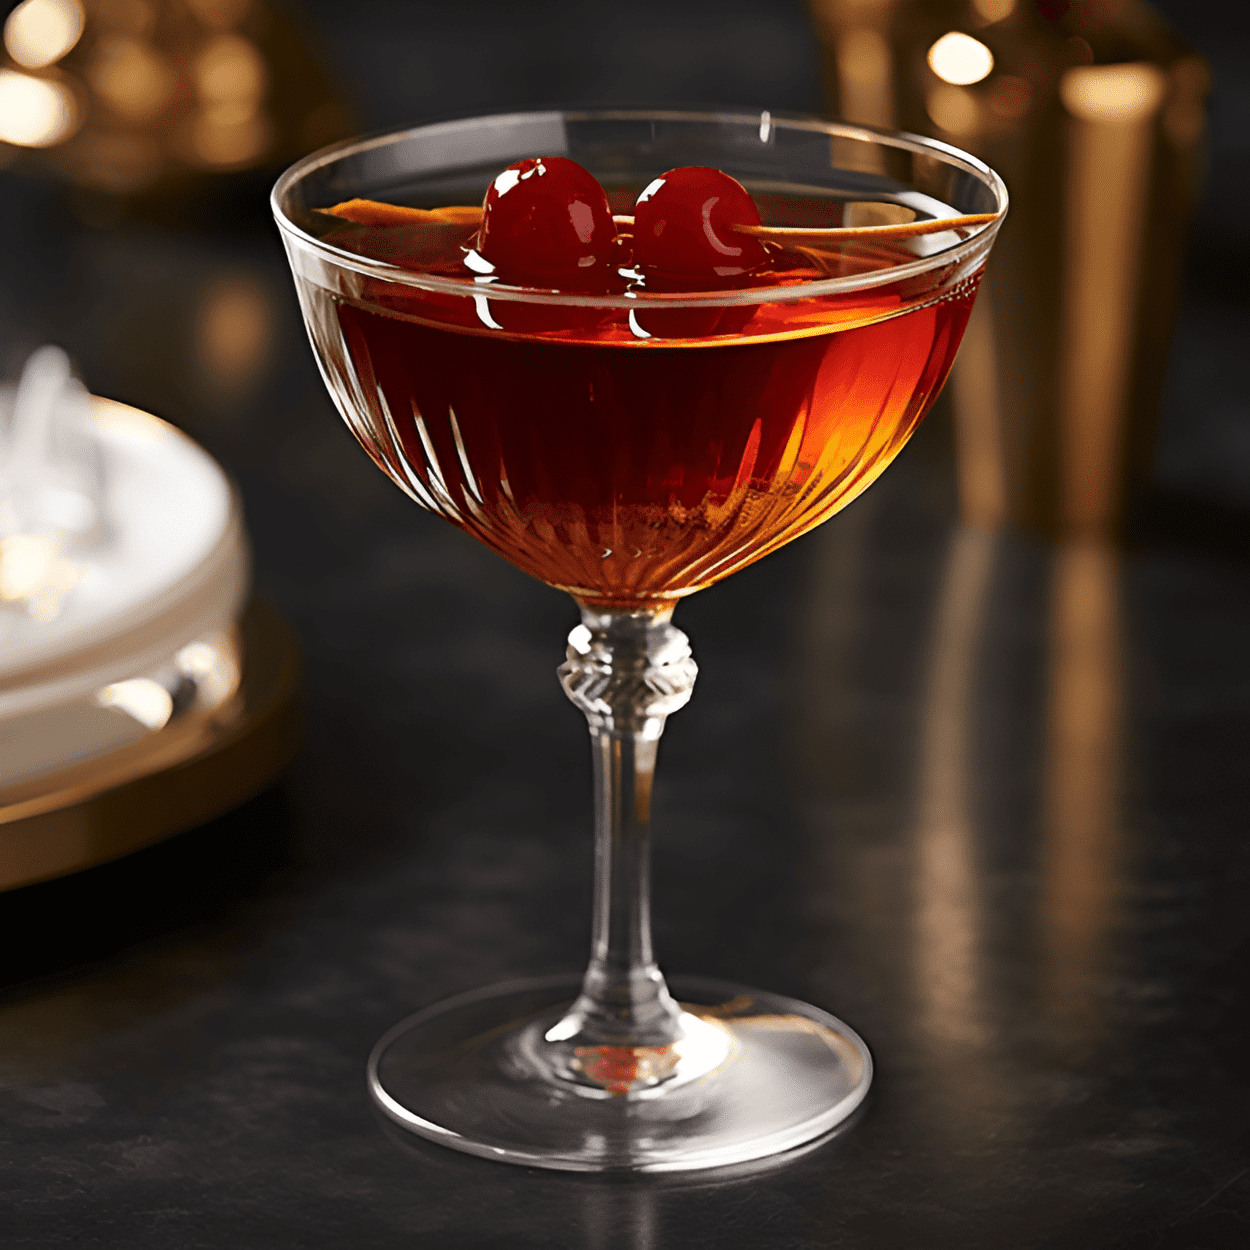 Spiced Manhattan Cocktail Recipe - The Spiced Manhattan is a robust and full-bodied cocktail. It's sweet, yet balanced with a spicy kick from the addition of spiced rum. The vermouth adds a subtle bitterness, while the cherry garnish provides a hint of tartness. It's a complex, layered drink that leaves a warm, lingering finish.